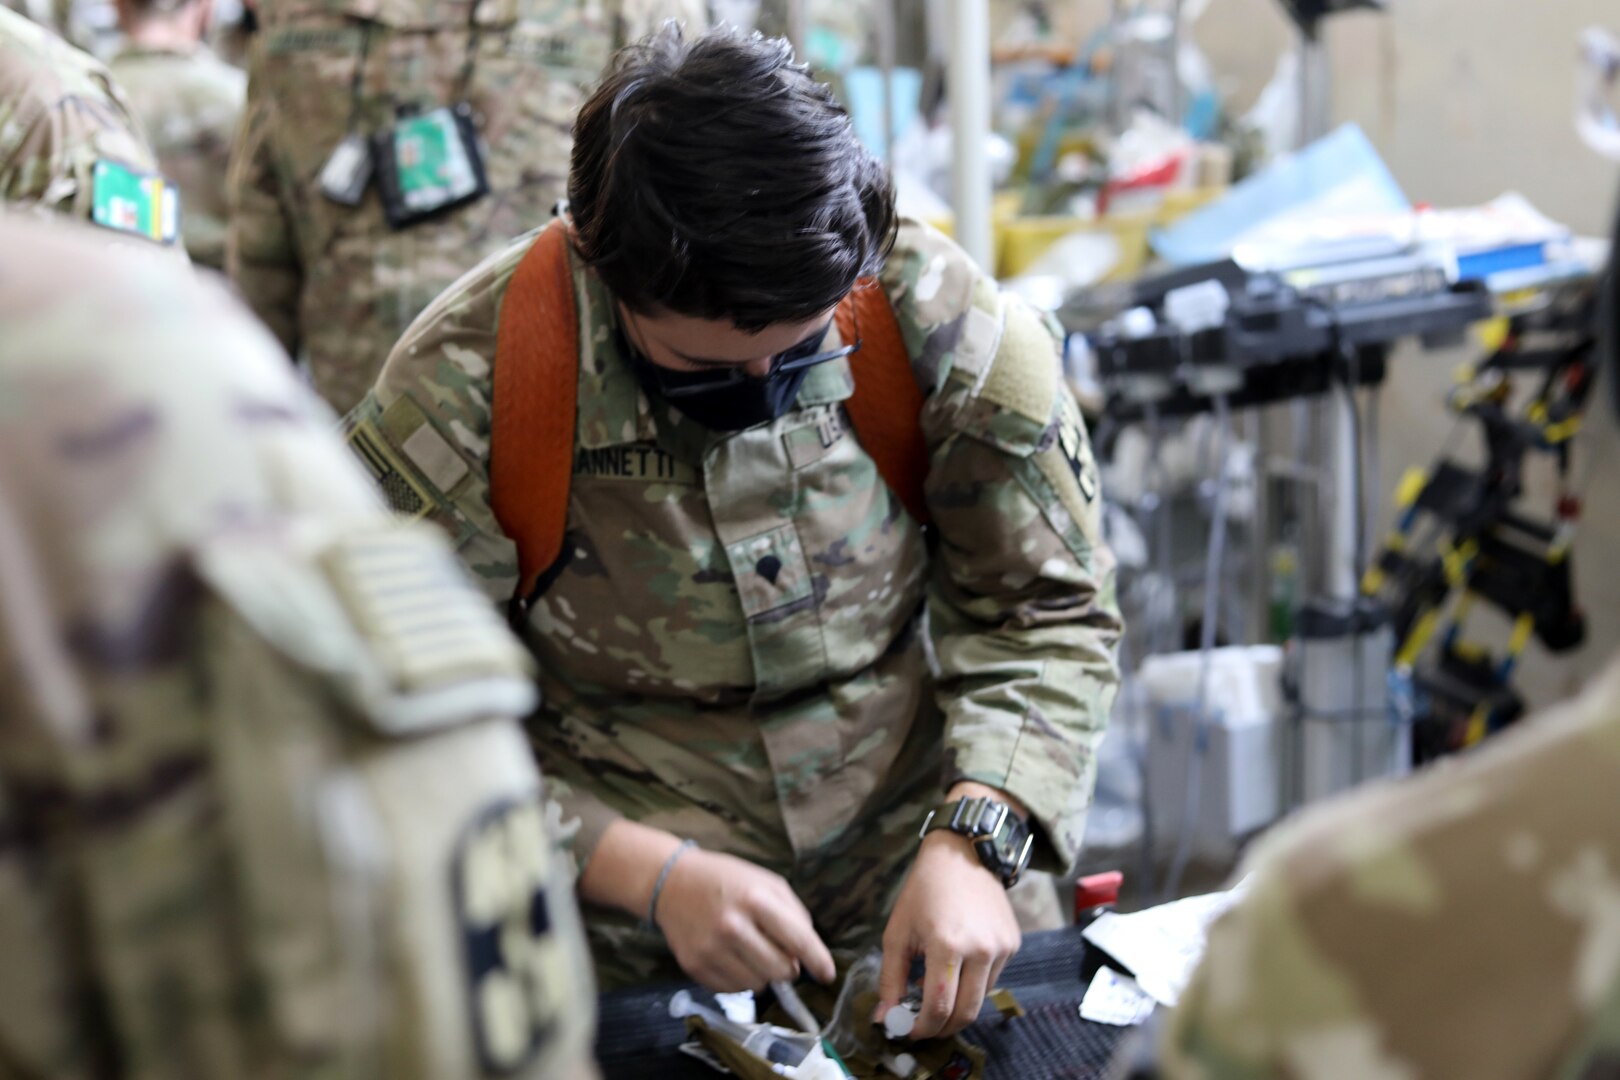 Spc. Olivia Mannetti, a combat medic with the 466th Medical Company, Area Support, New York National Guard, prepares to make an incision on a simulated throat as she practices conducting a cricothyrotomy at the Role 2 compound at Ain al-Asad base, Iraq, Oct. 30, 2020. The company recently completed a nine-month deployment to the Middle East and returned to New York.